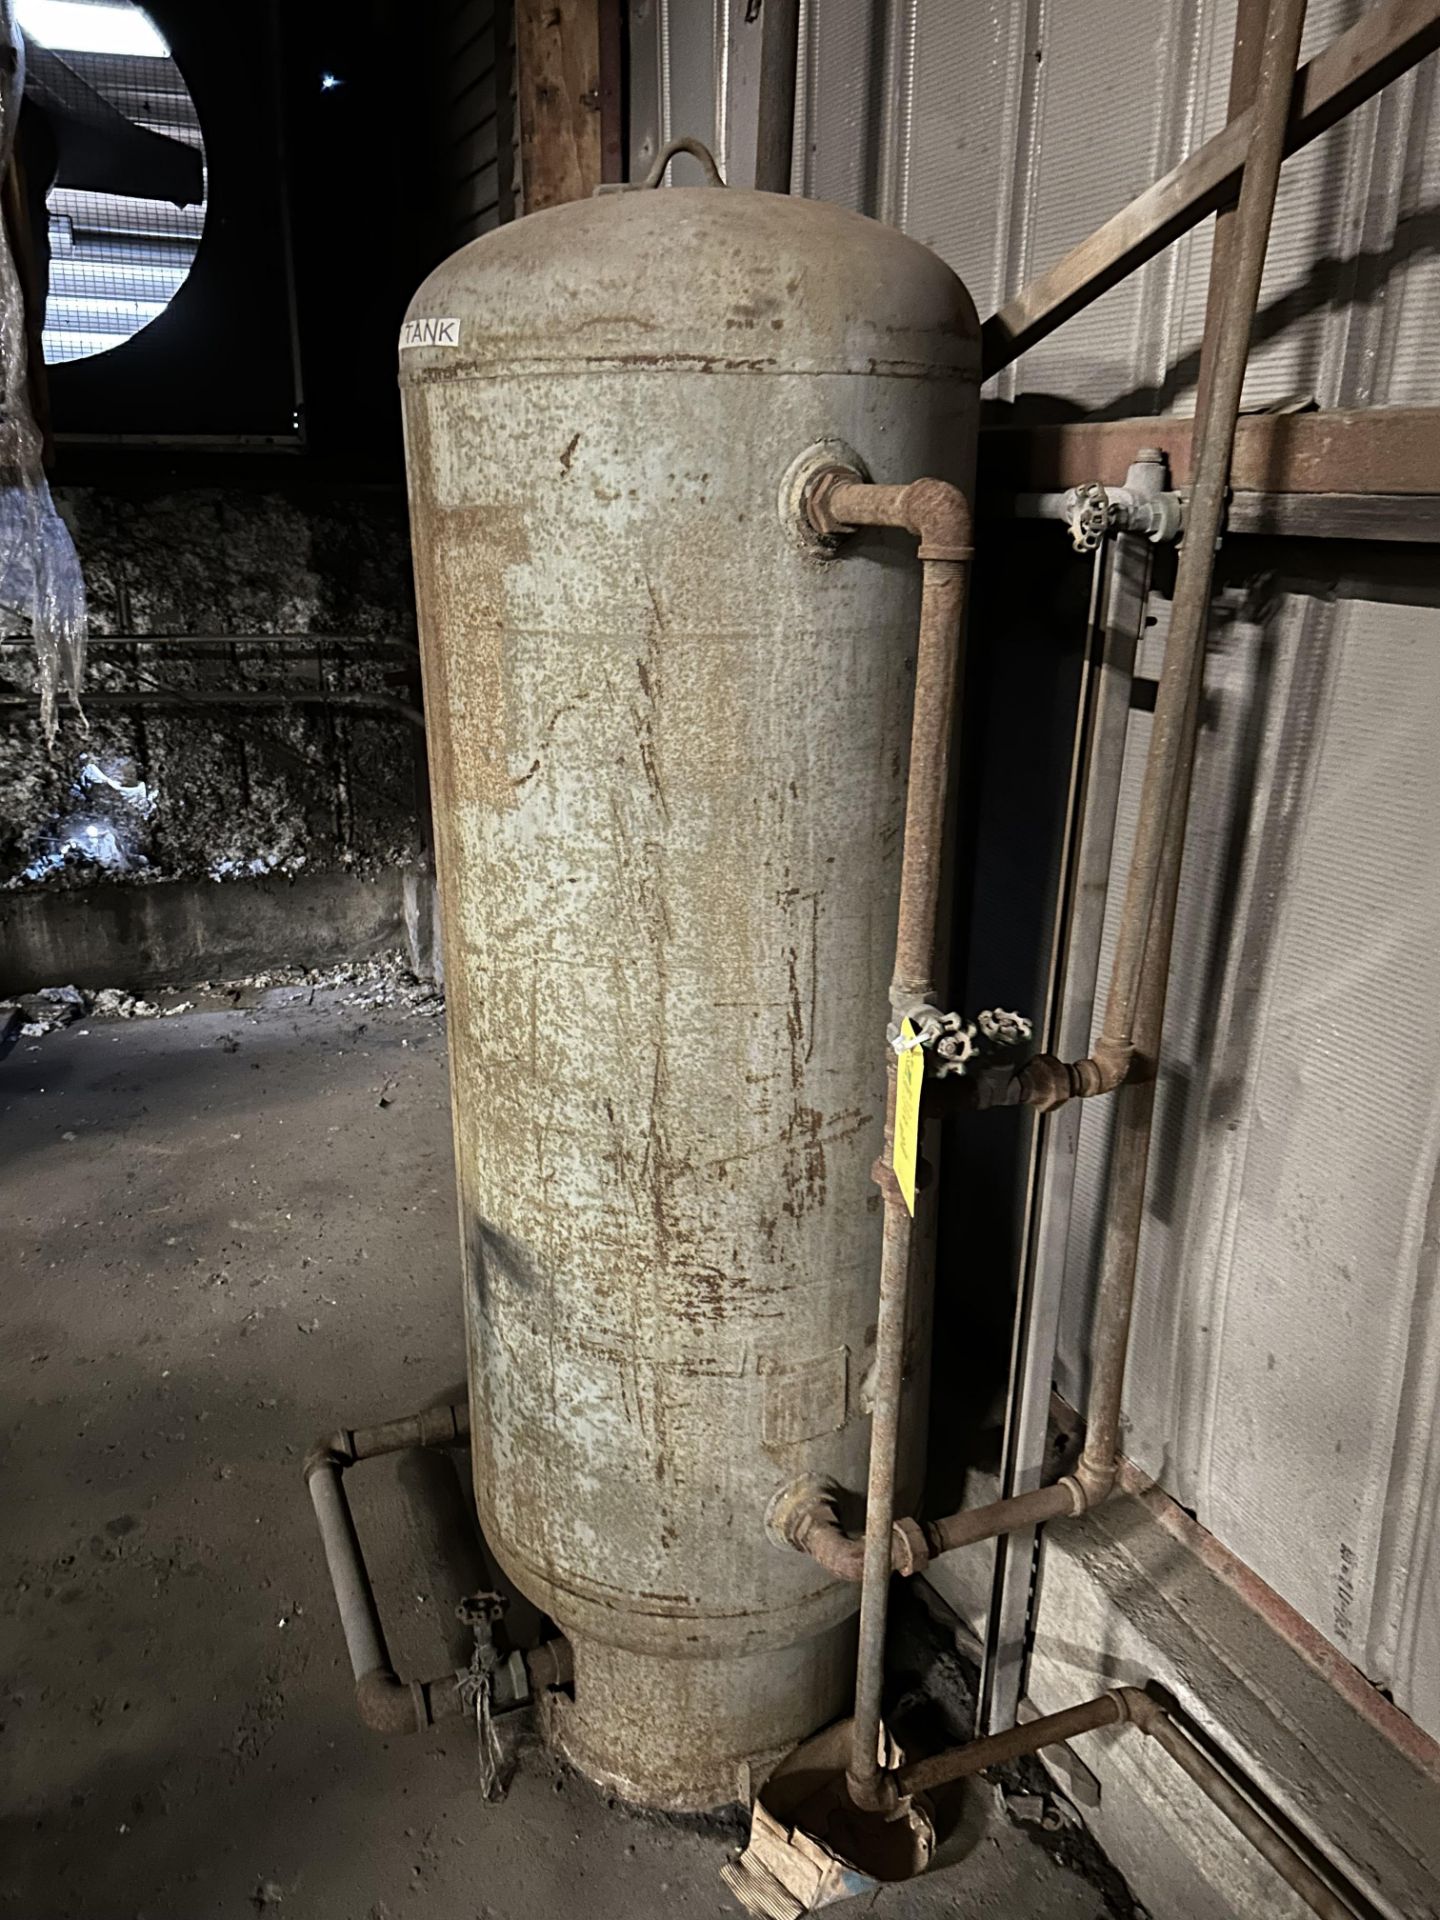 Air Tank, Rigging/ Removal Fee - $125 - Image 2 of 3